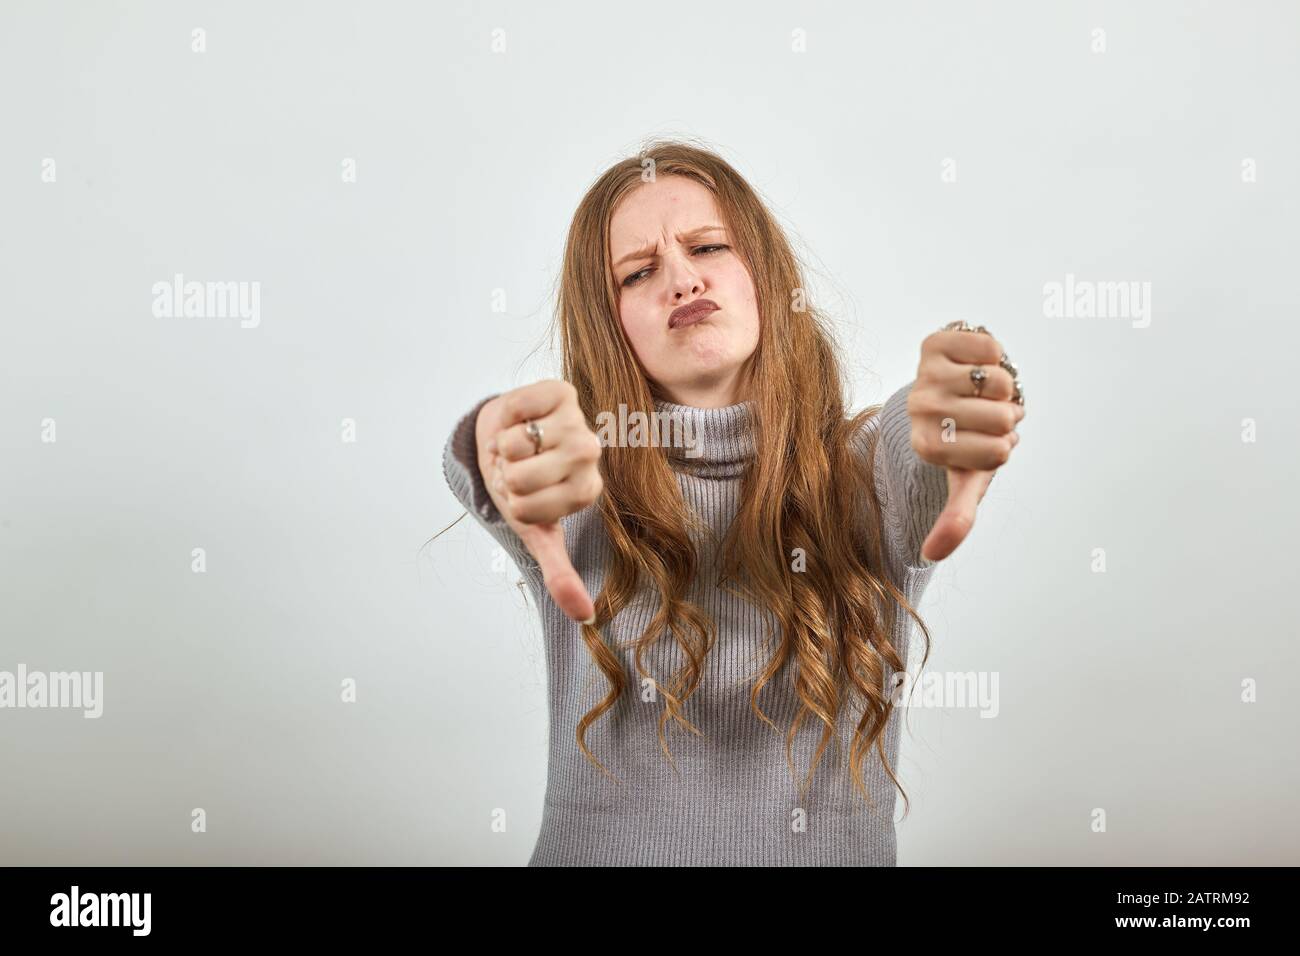 woman in grey sweater an enraged girl returns thumbs down demonstrates anger Stock Photo